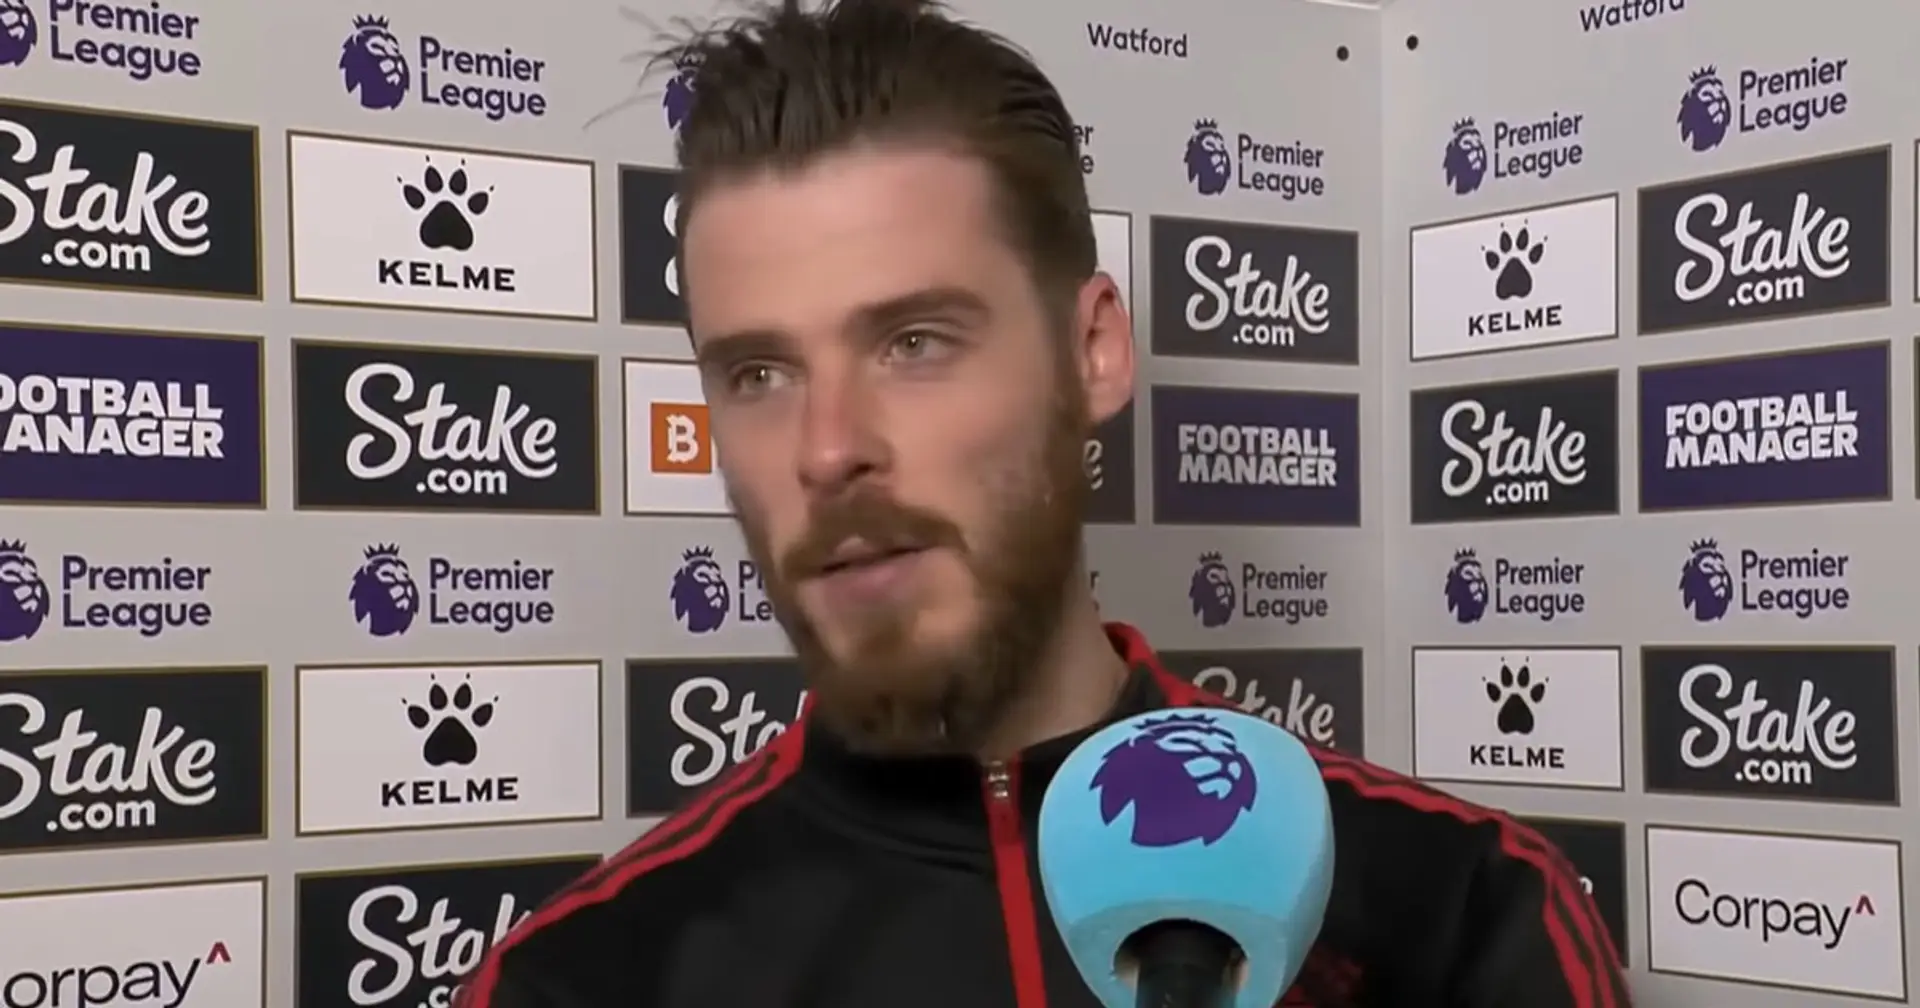 'Ones who don't want to stay, get out': De Gea unleashes rant after Palace loss